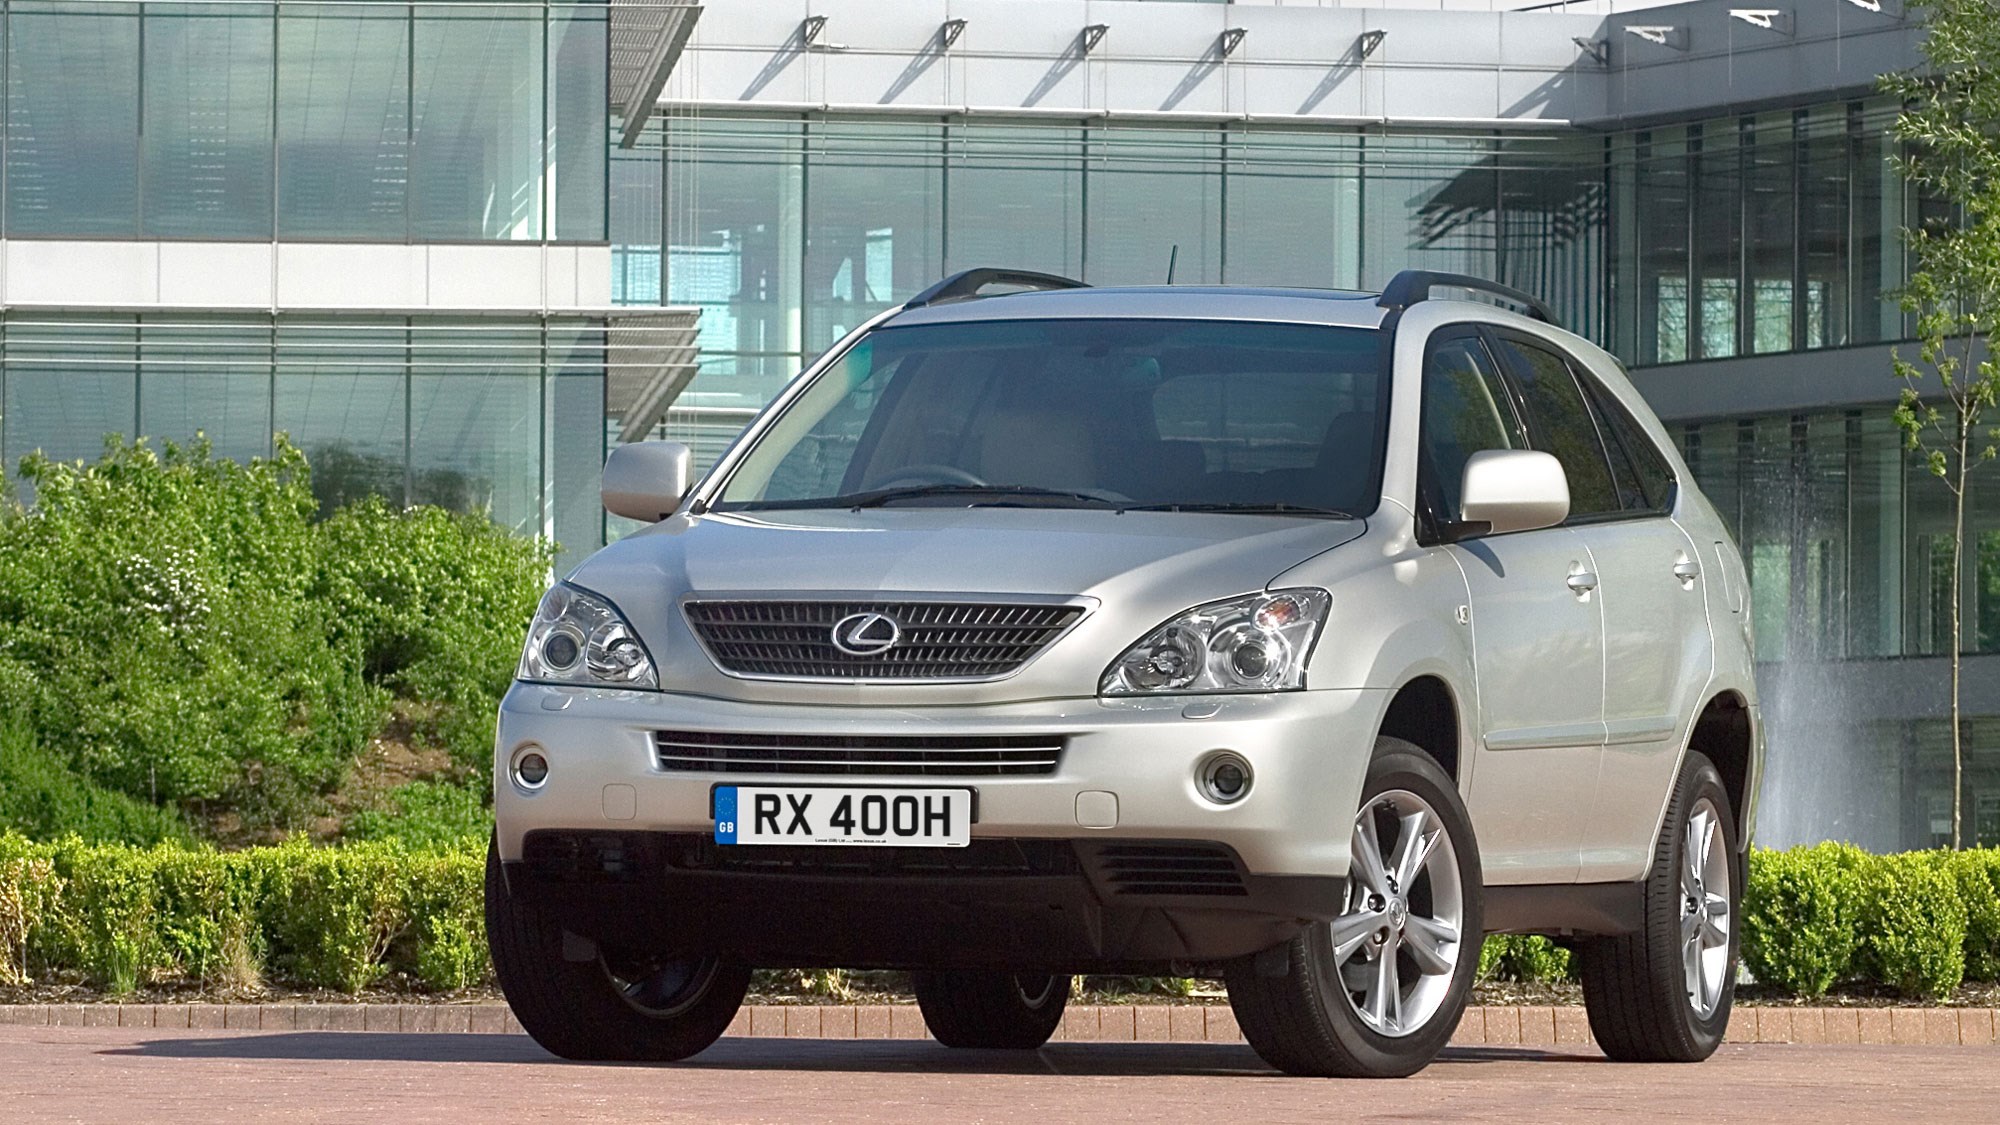 Lexus RX400h hybrid SUV review - front view, silver